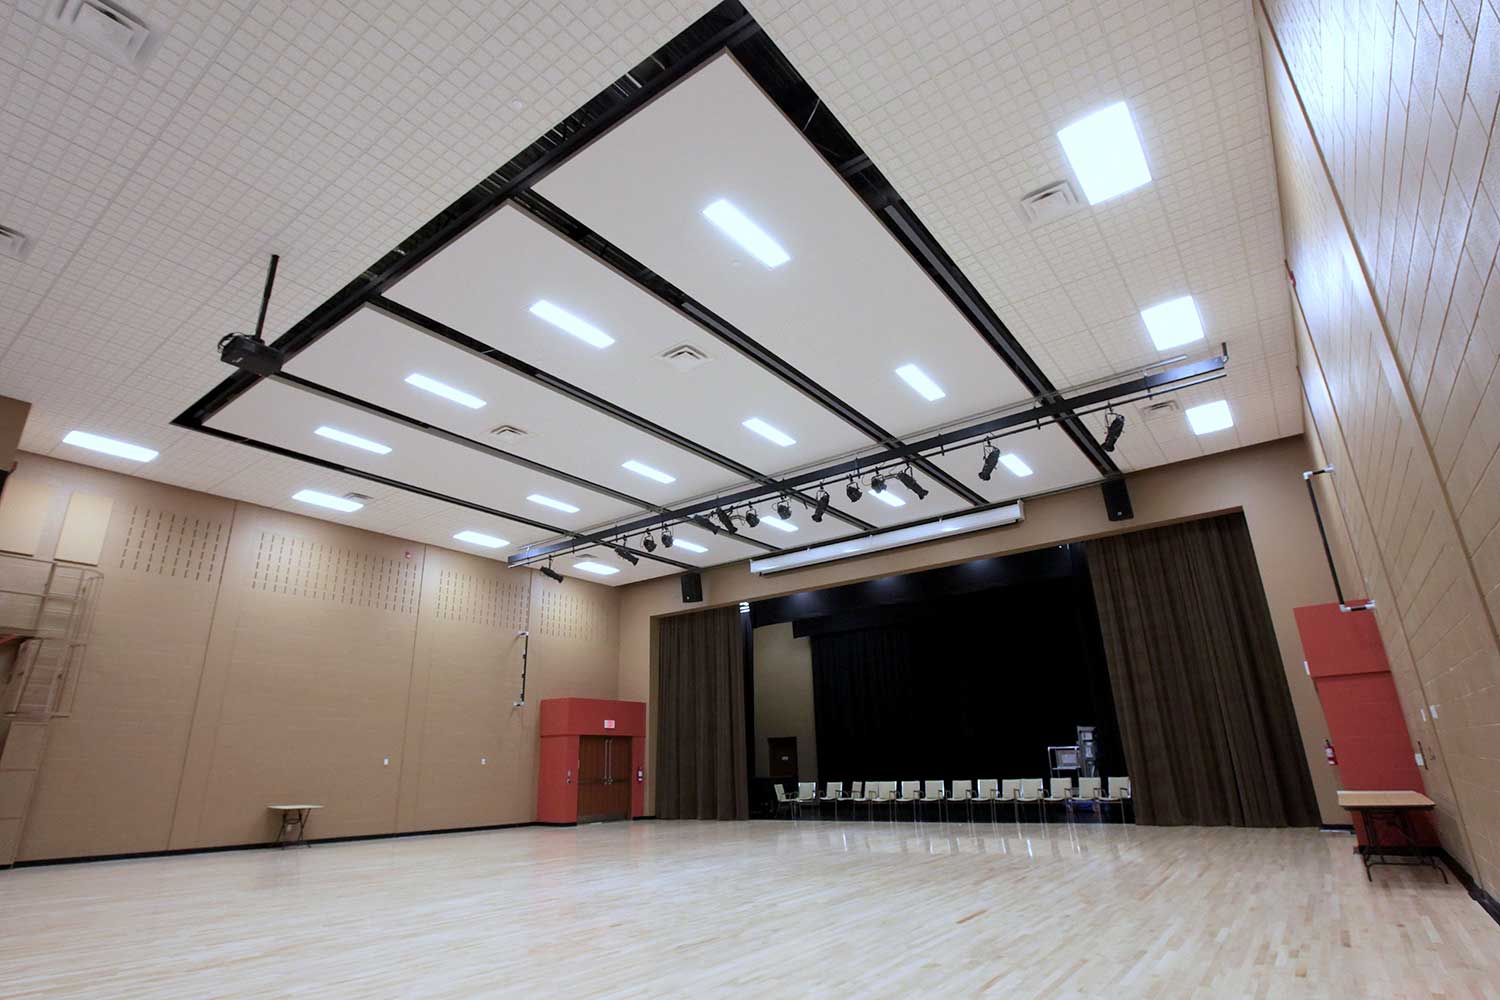 image of the theater at the Community Centre